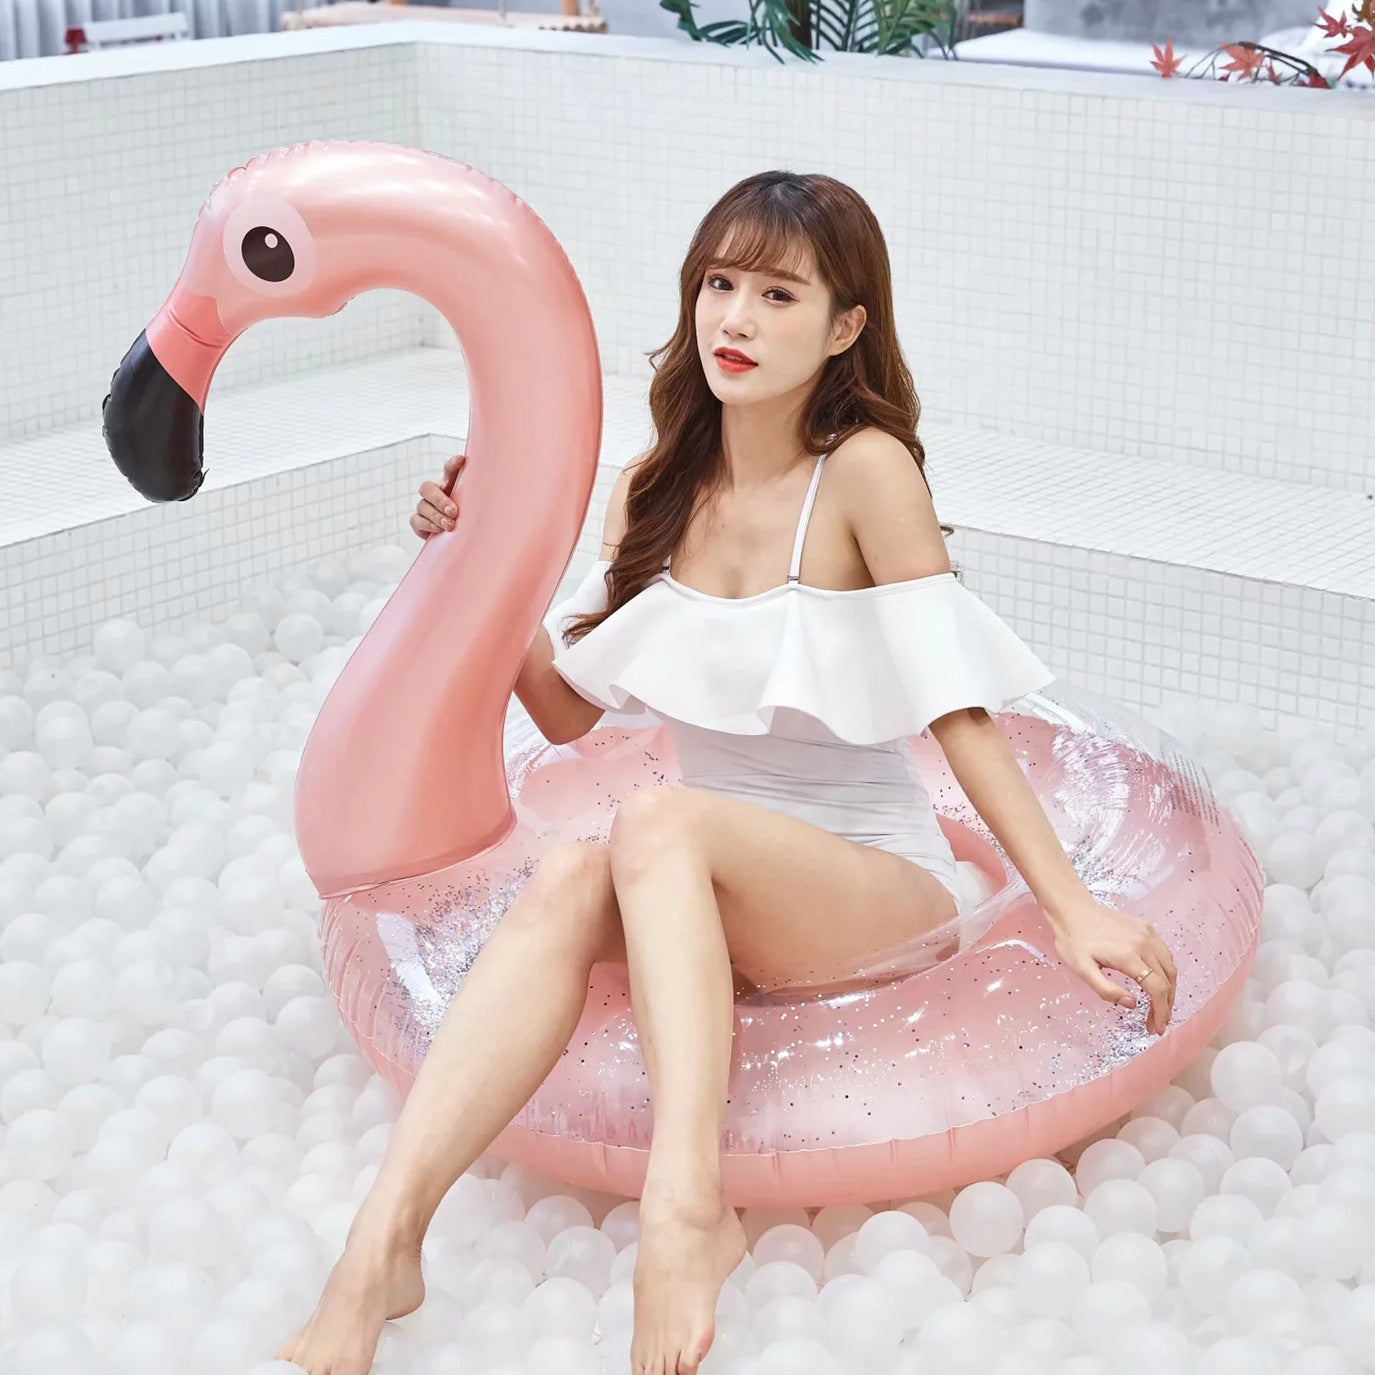 Flamingo Glitter Ring - Inflatable | Inflatables | PARADIS SVP